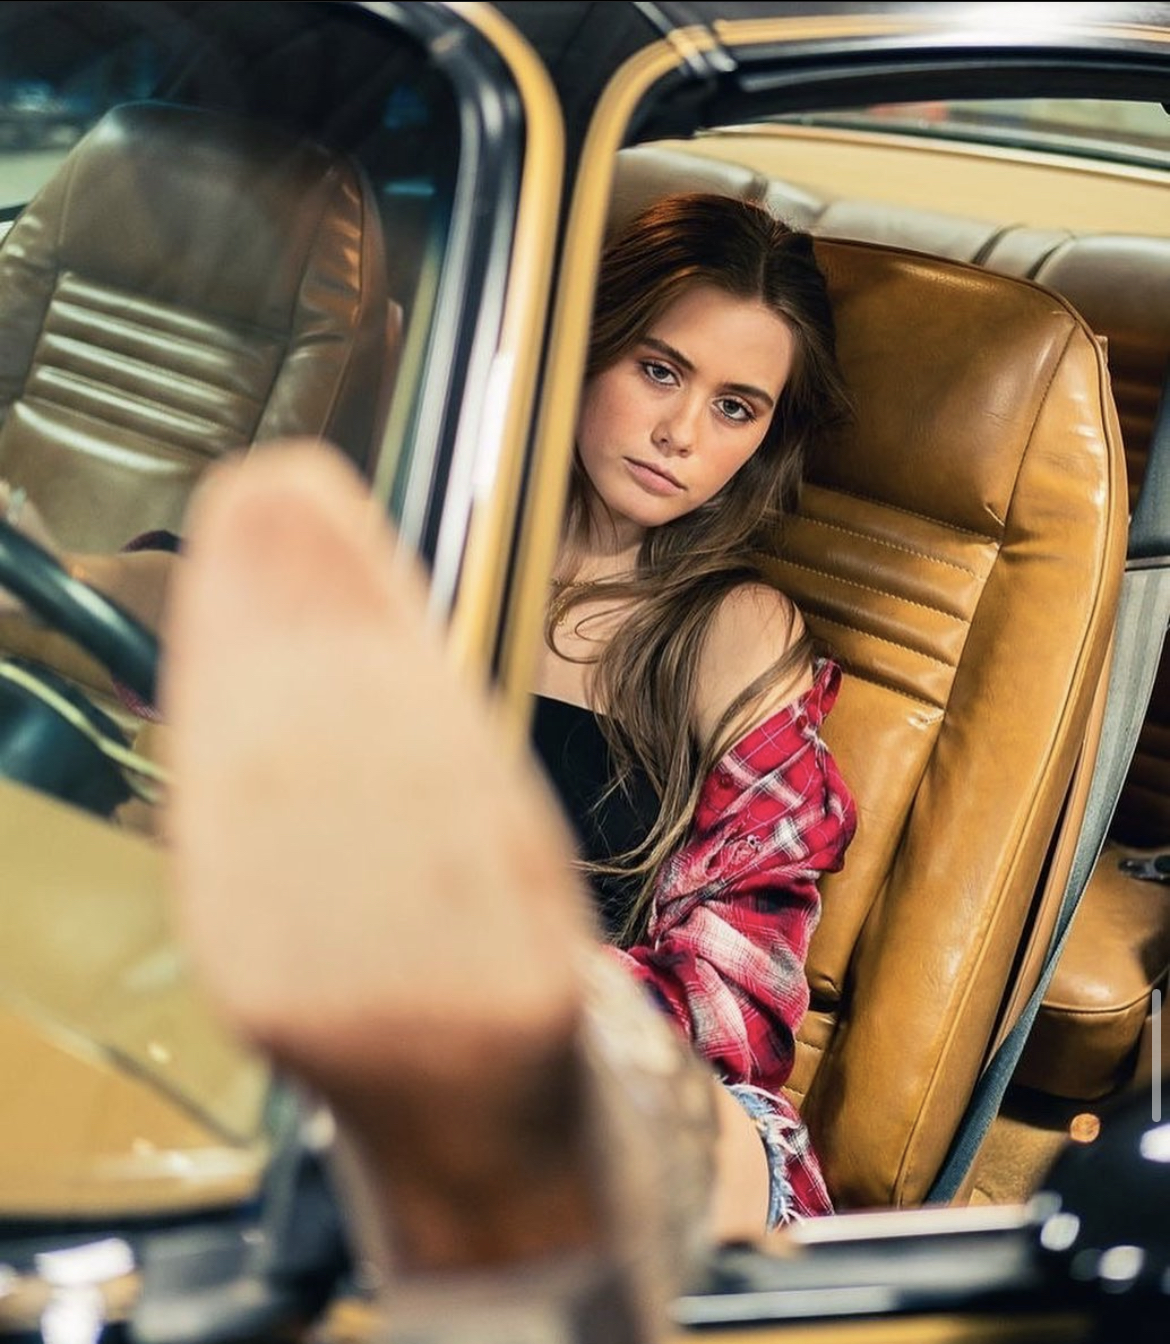 Mackenzie modeling in a car with her foot out the window from the magazine feature